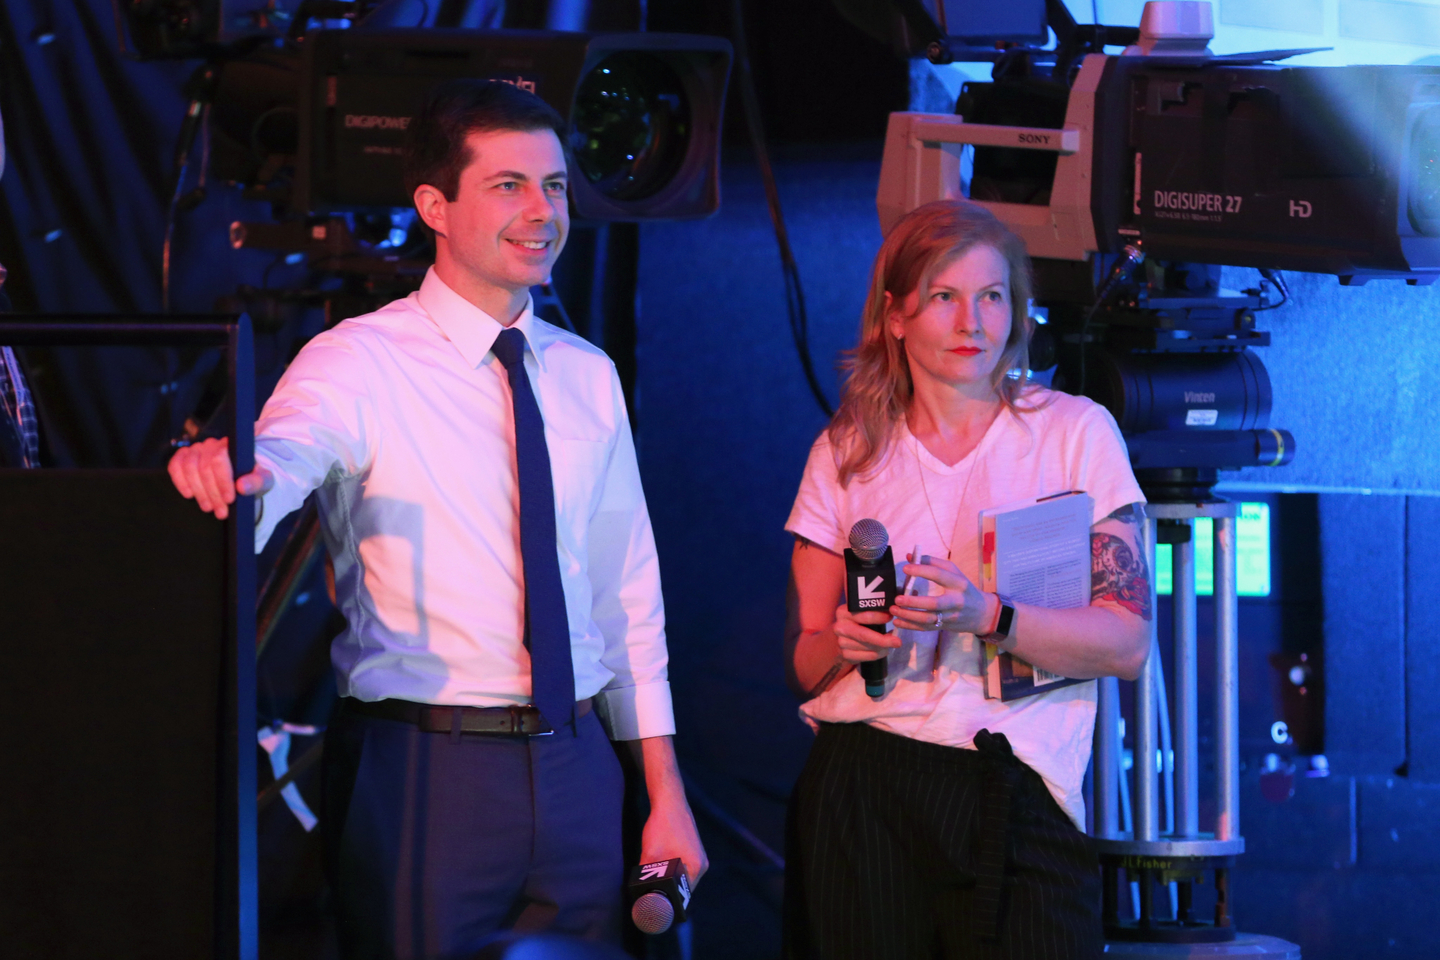 Mayor Pete Buttigieg and Ana Marie Cox backstage at Conversations About America's Future – Photo by Hutton Supancic/Getty Images for SXSW